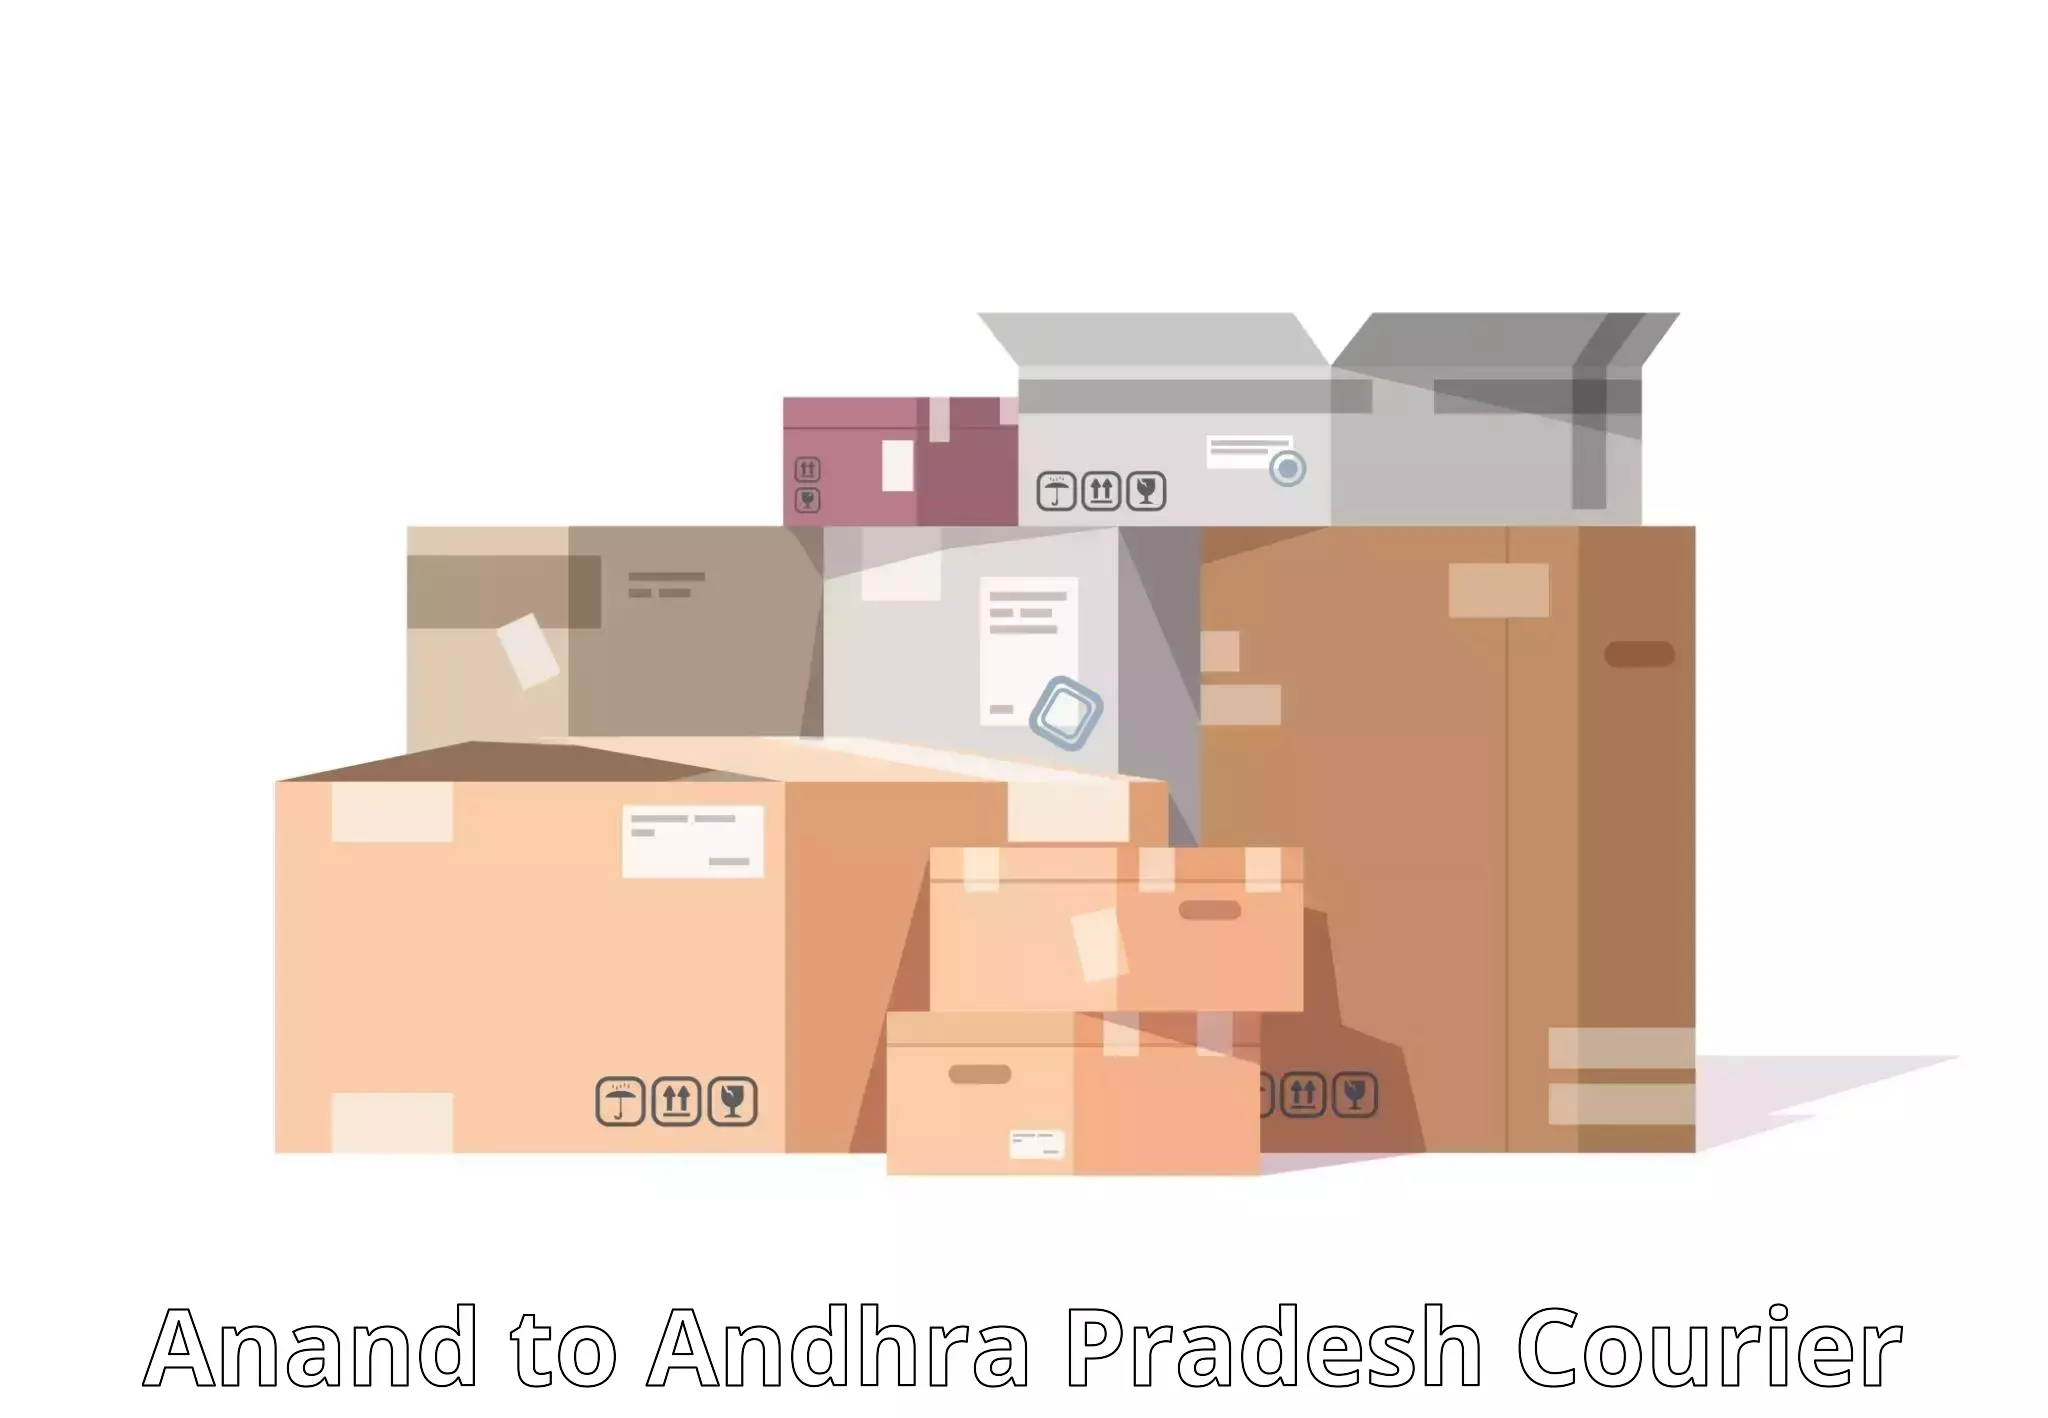 Global courier networks Anand to Bobbili